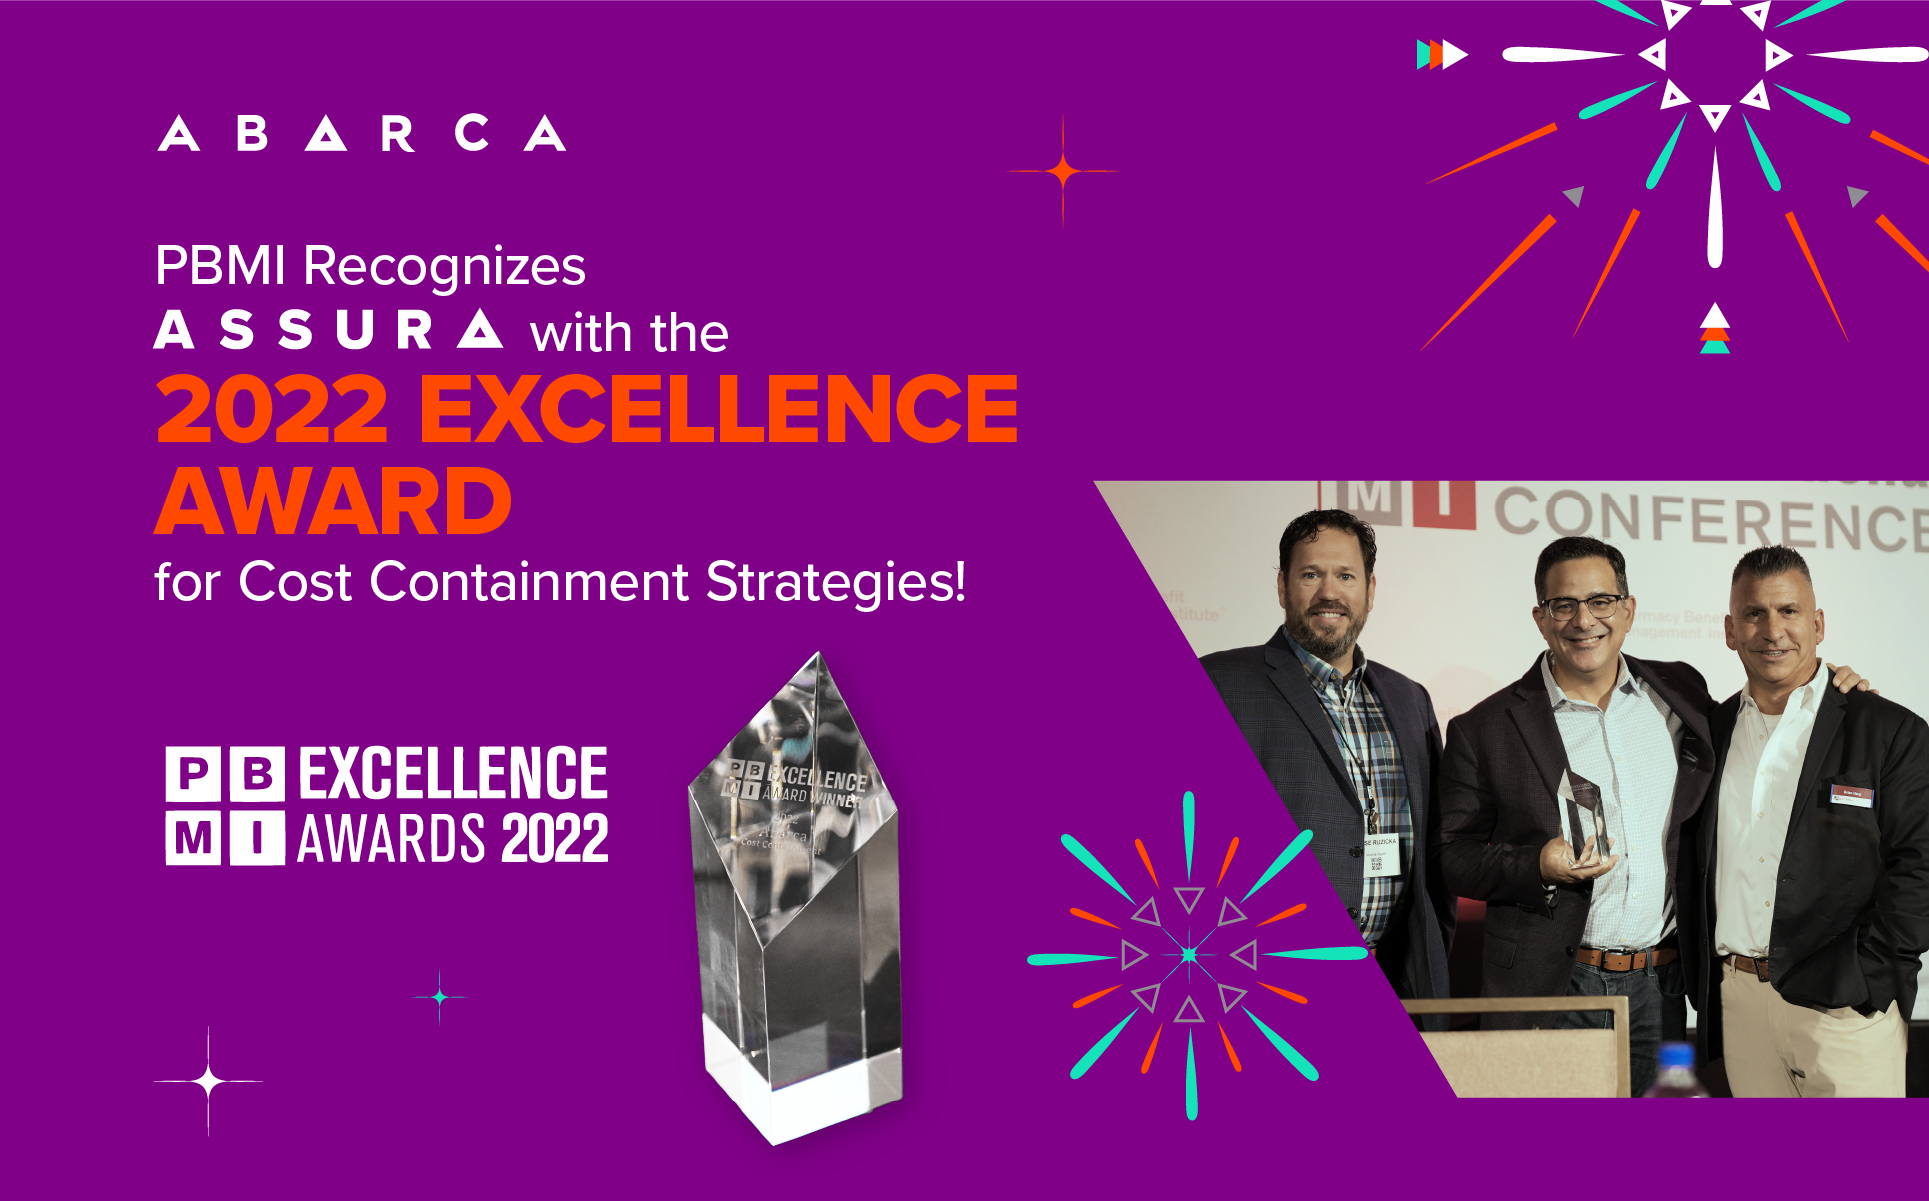 Abarca's financial model Assura receives PBMI Excellence Award for Cost Containment Strategies